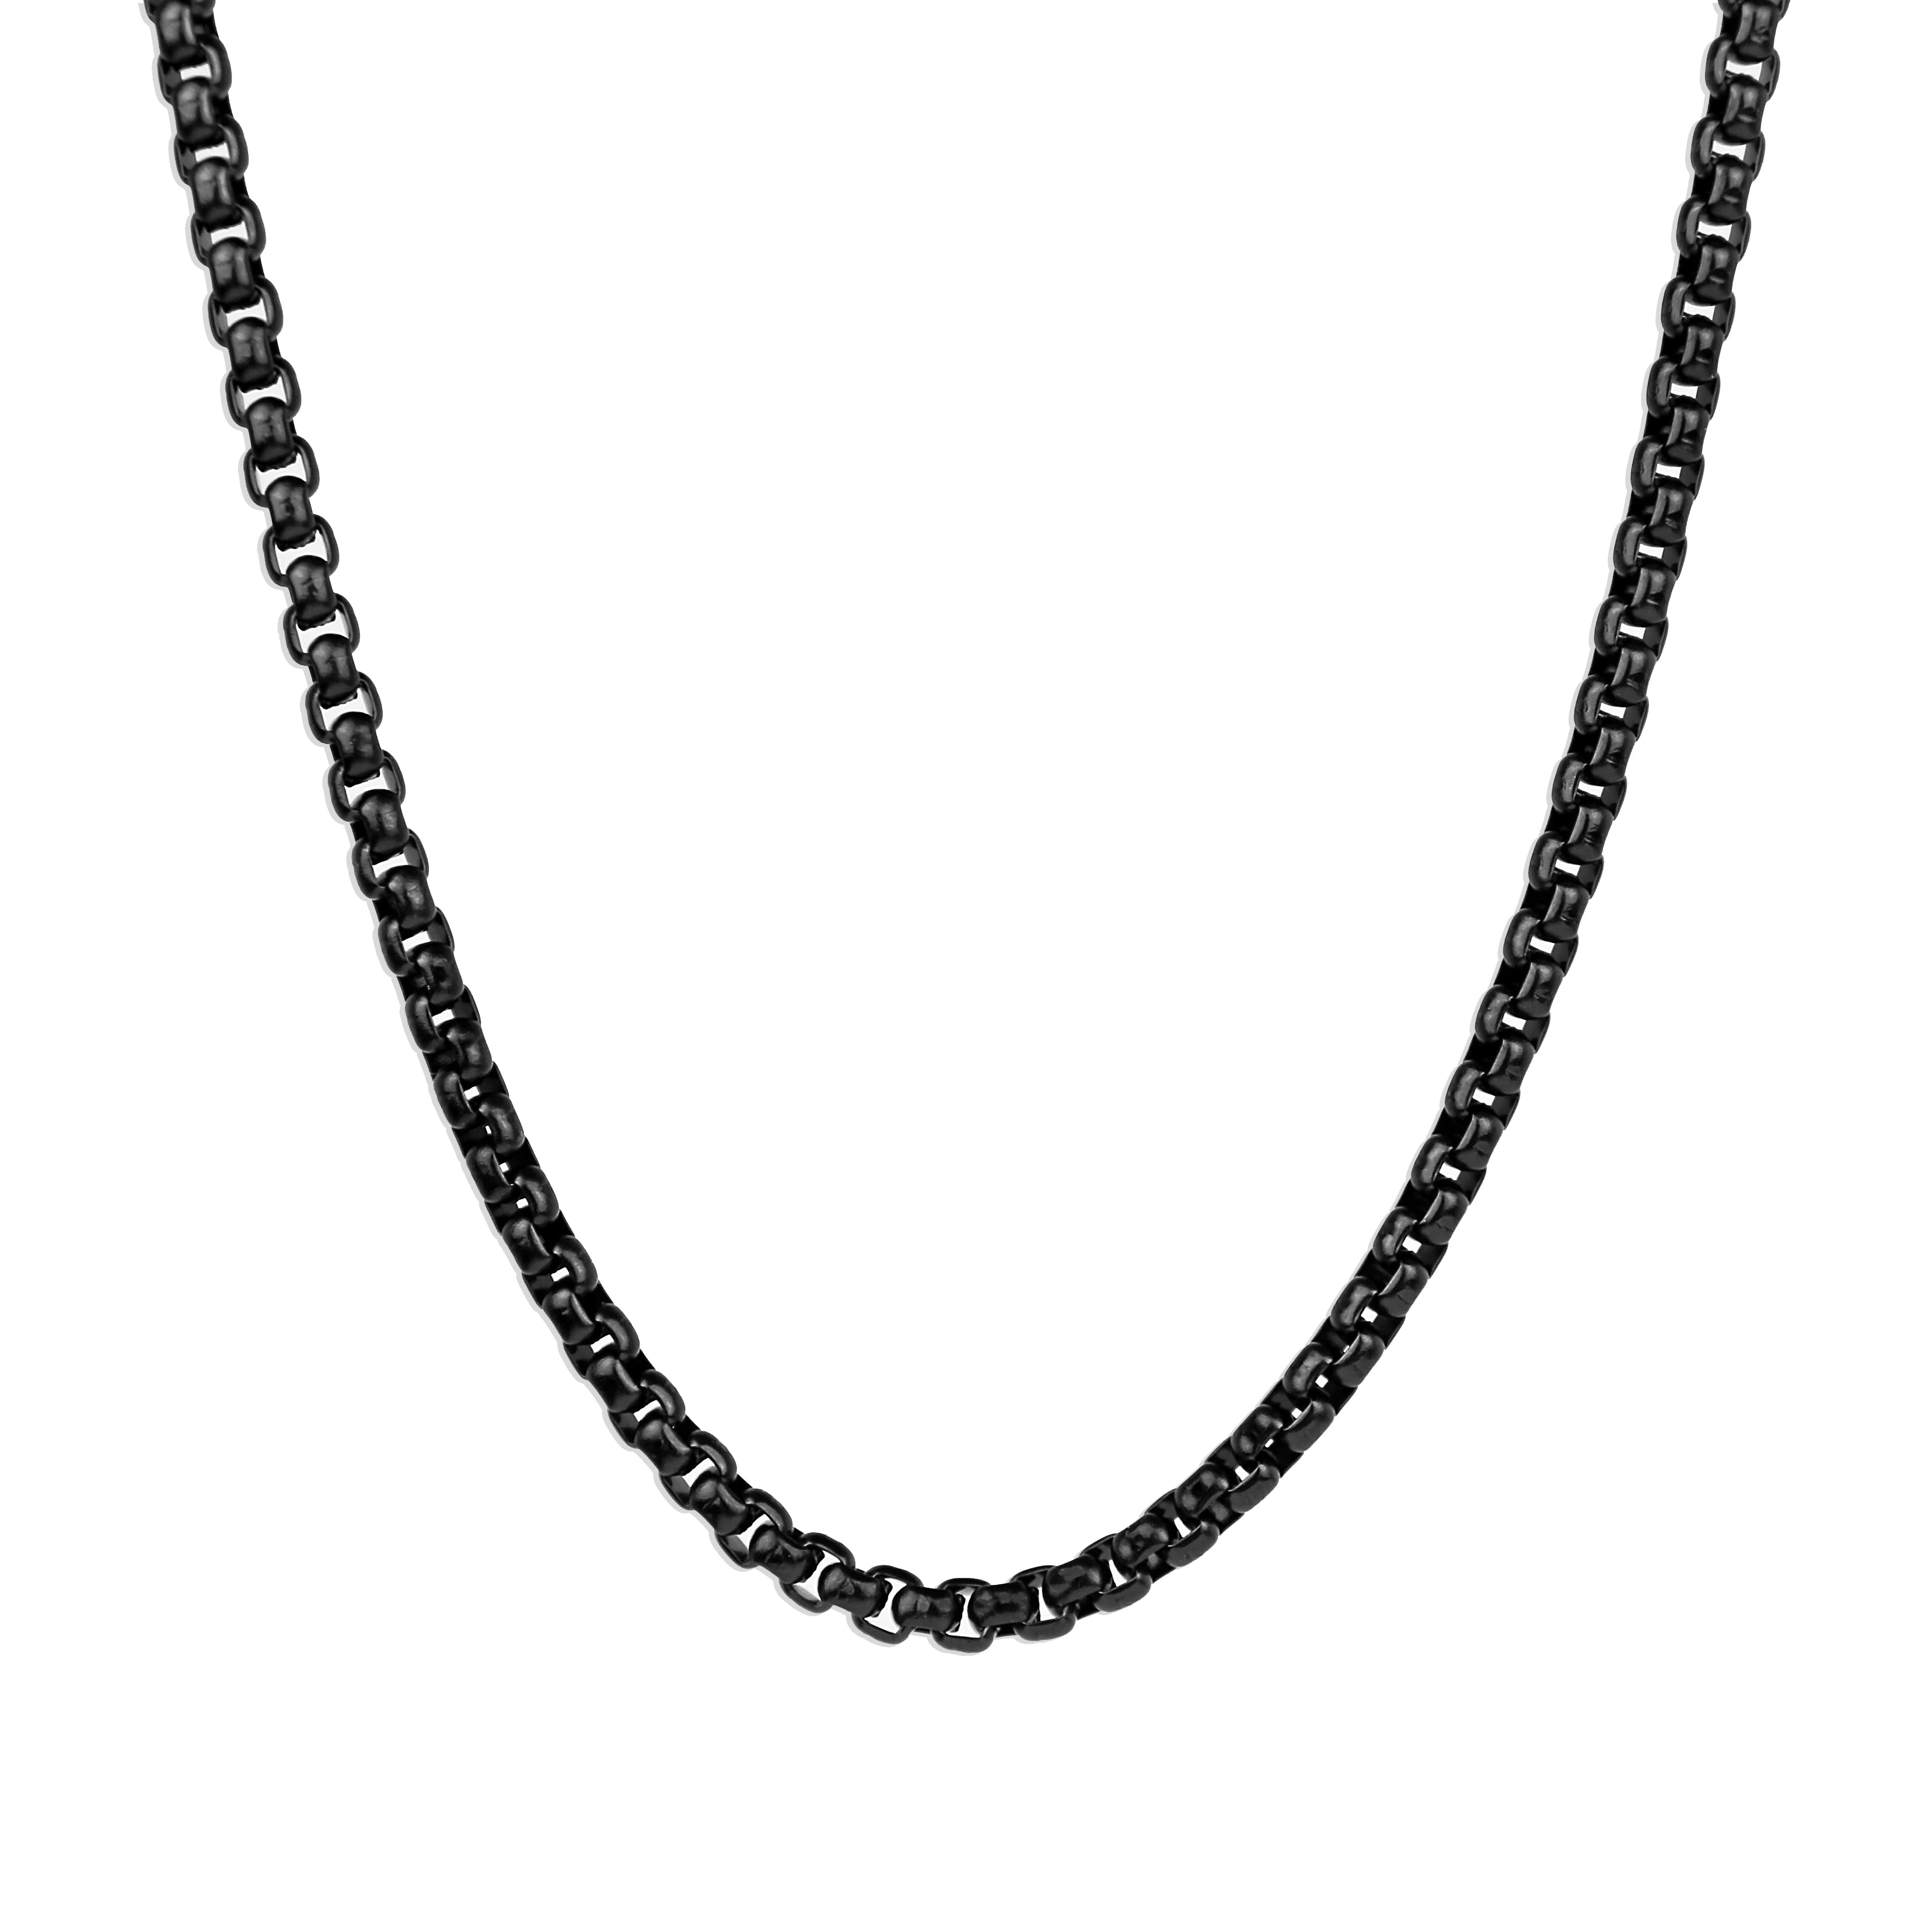 Box Chain Necklace - Black 3.5mm 24 Inches